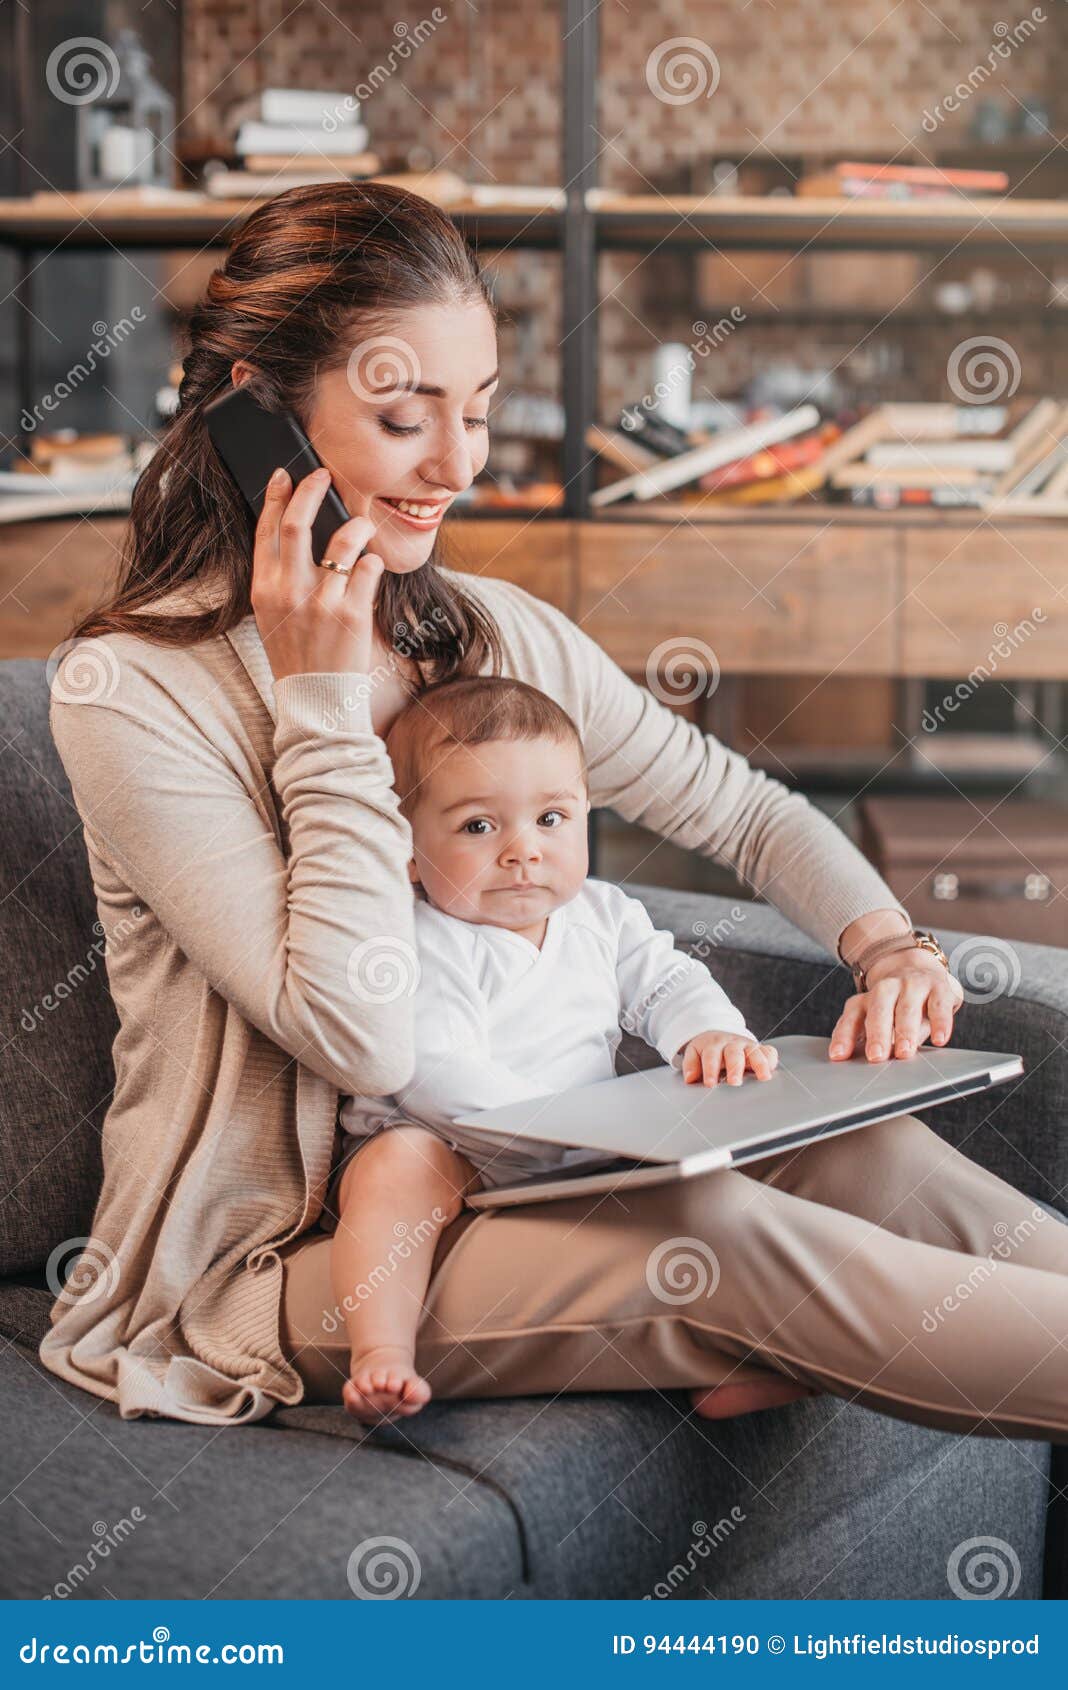 Mother Smiling And Working At Home